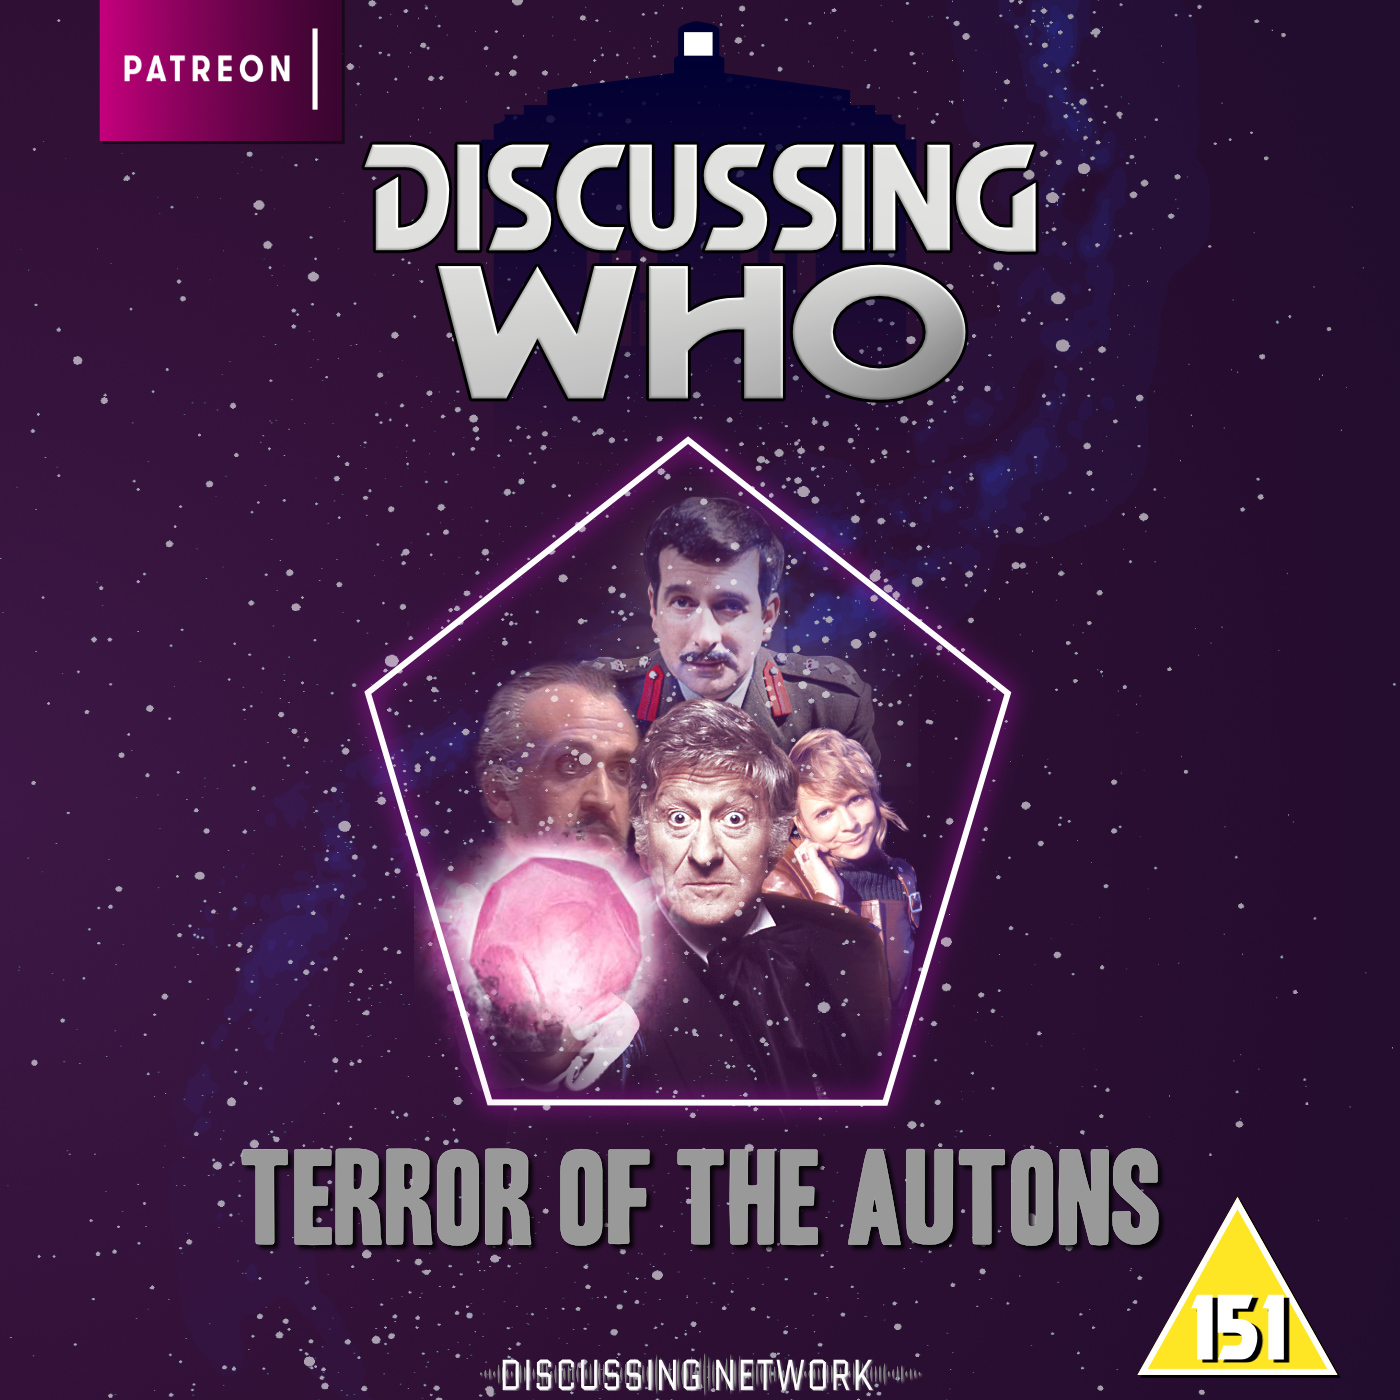 Review of Terror of the Autons